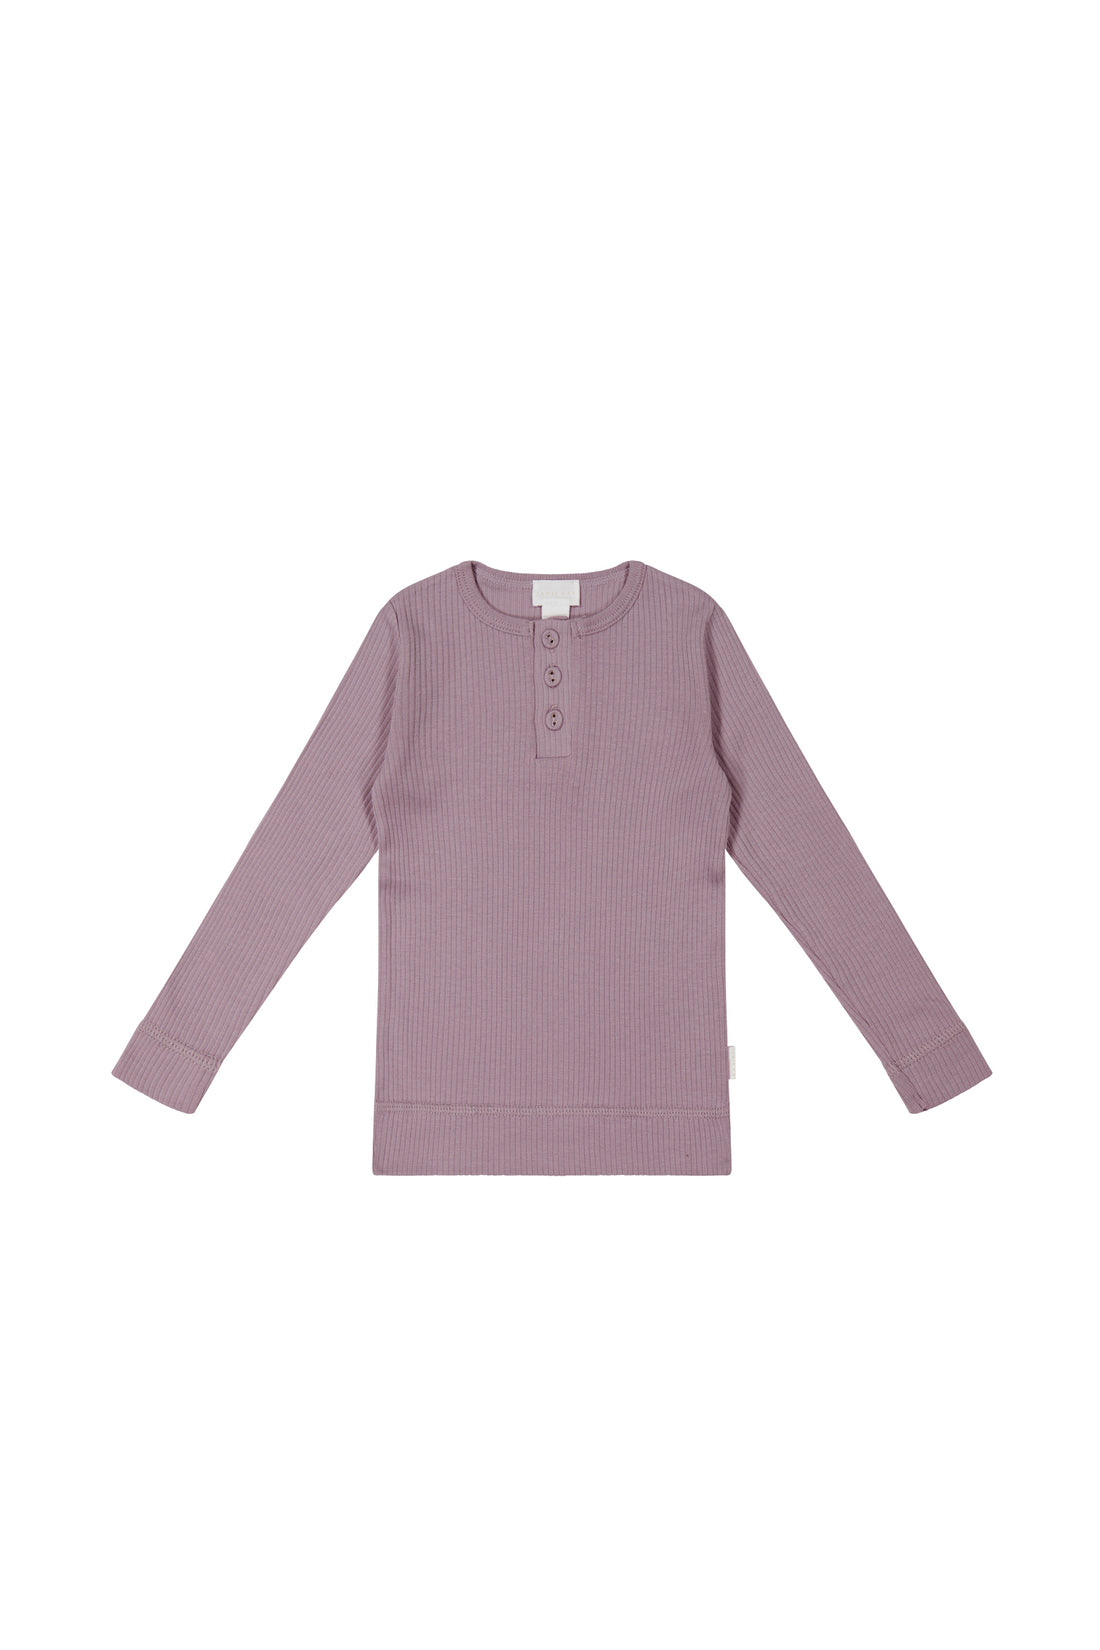 Organic Cotton Modal Long Sleeve Henley - Melody Childrens Top from Jamie Kay NZ